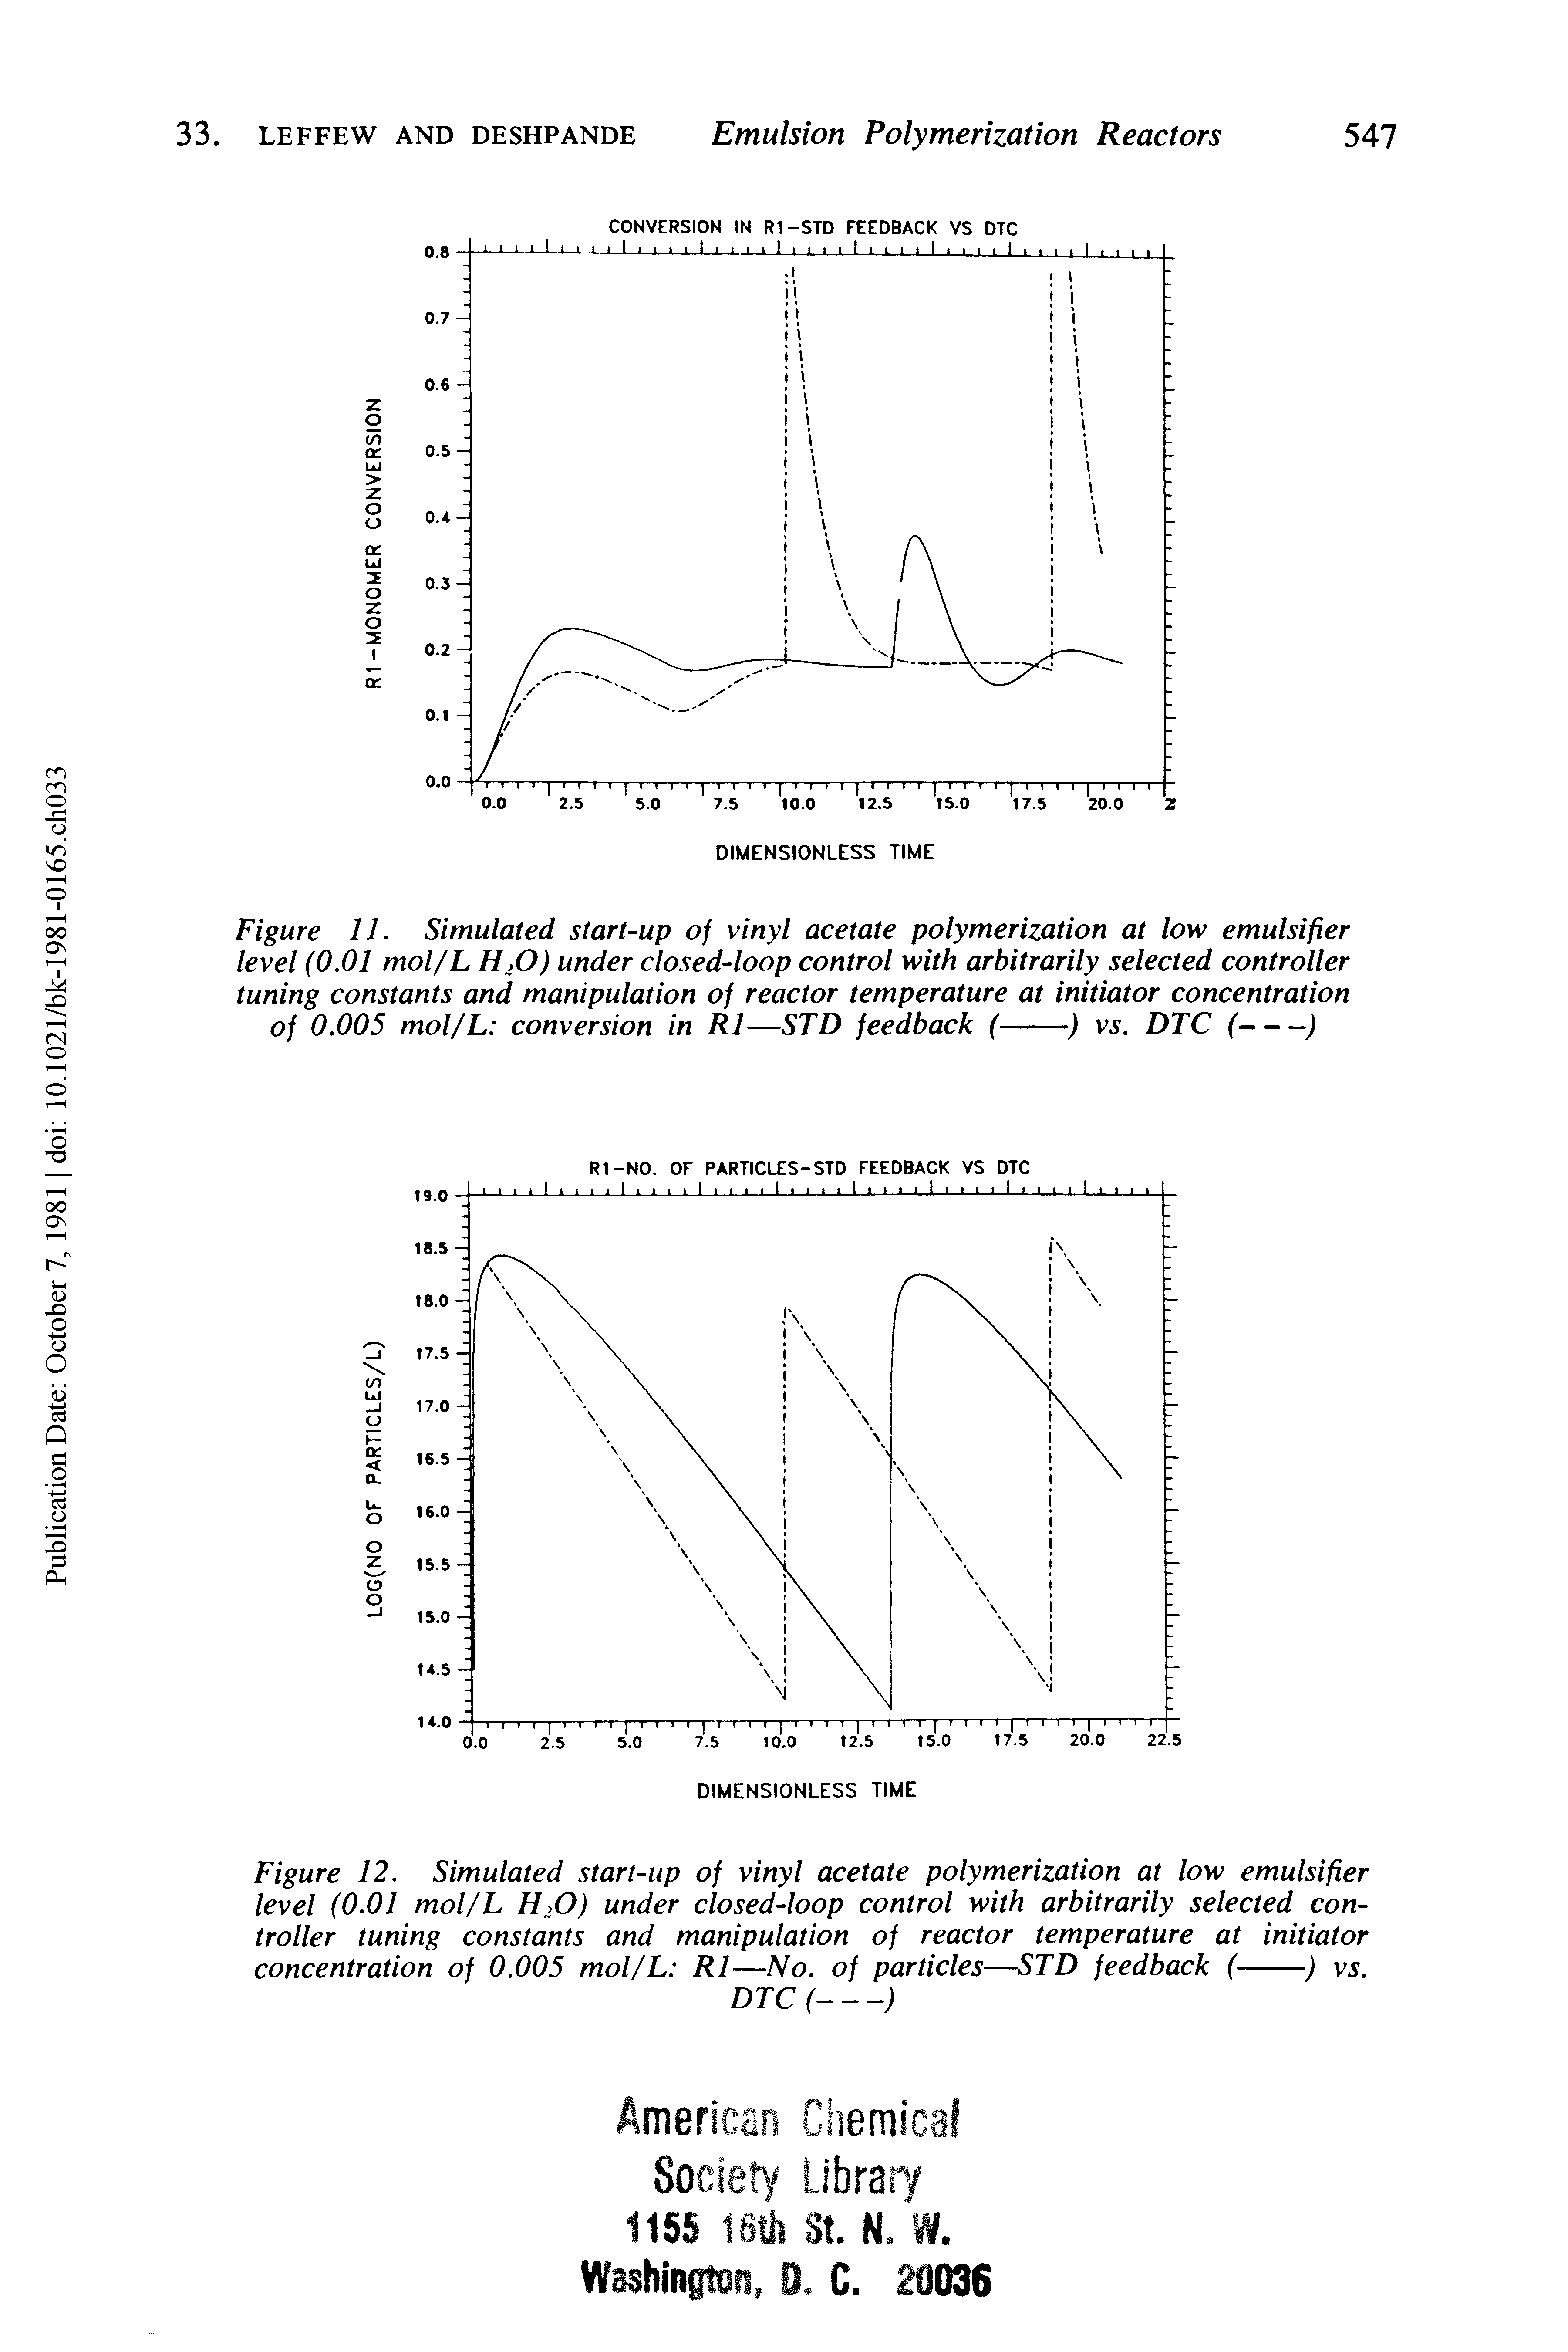 Figure 11. Simulated start-up of vinyl acetate polymerization at low emulsifier level (0.01 mol/L H>0) under closed-loop control with arbitrarily selected controller tuning constants and manipulation of reactor temperature at initiator concentration of 0.005 mol/L conversion in R1—STD feedback (-------------) vs. DTC (------)...